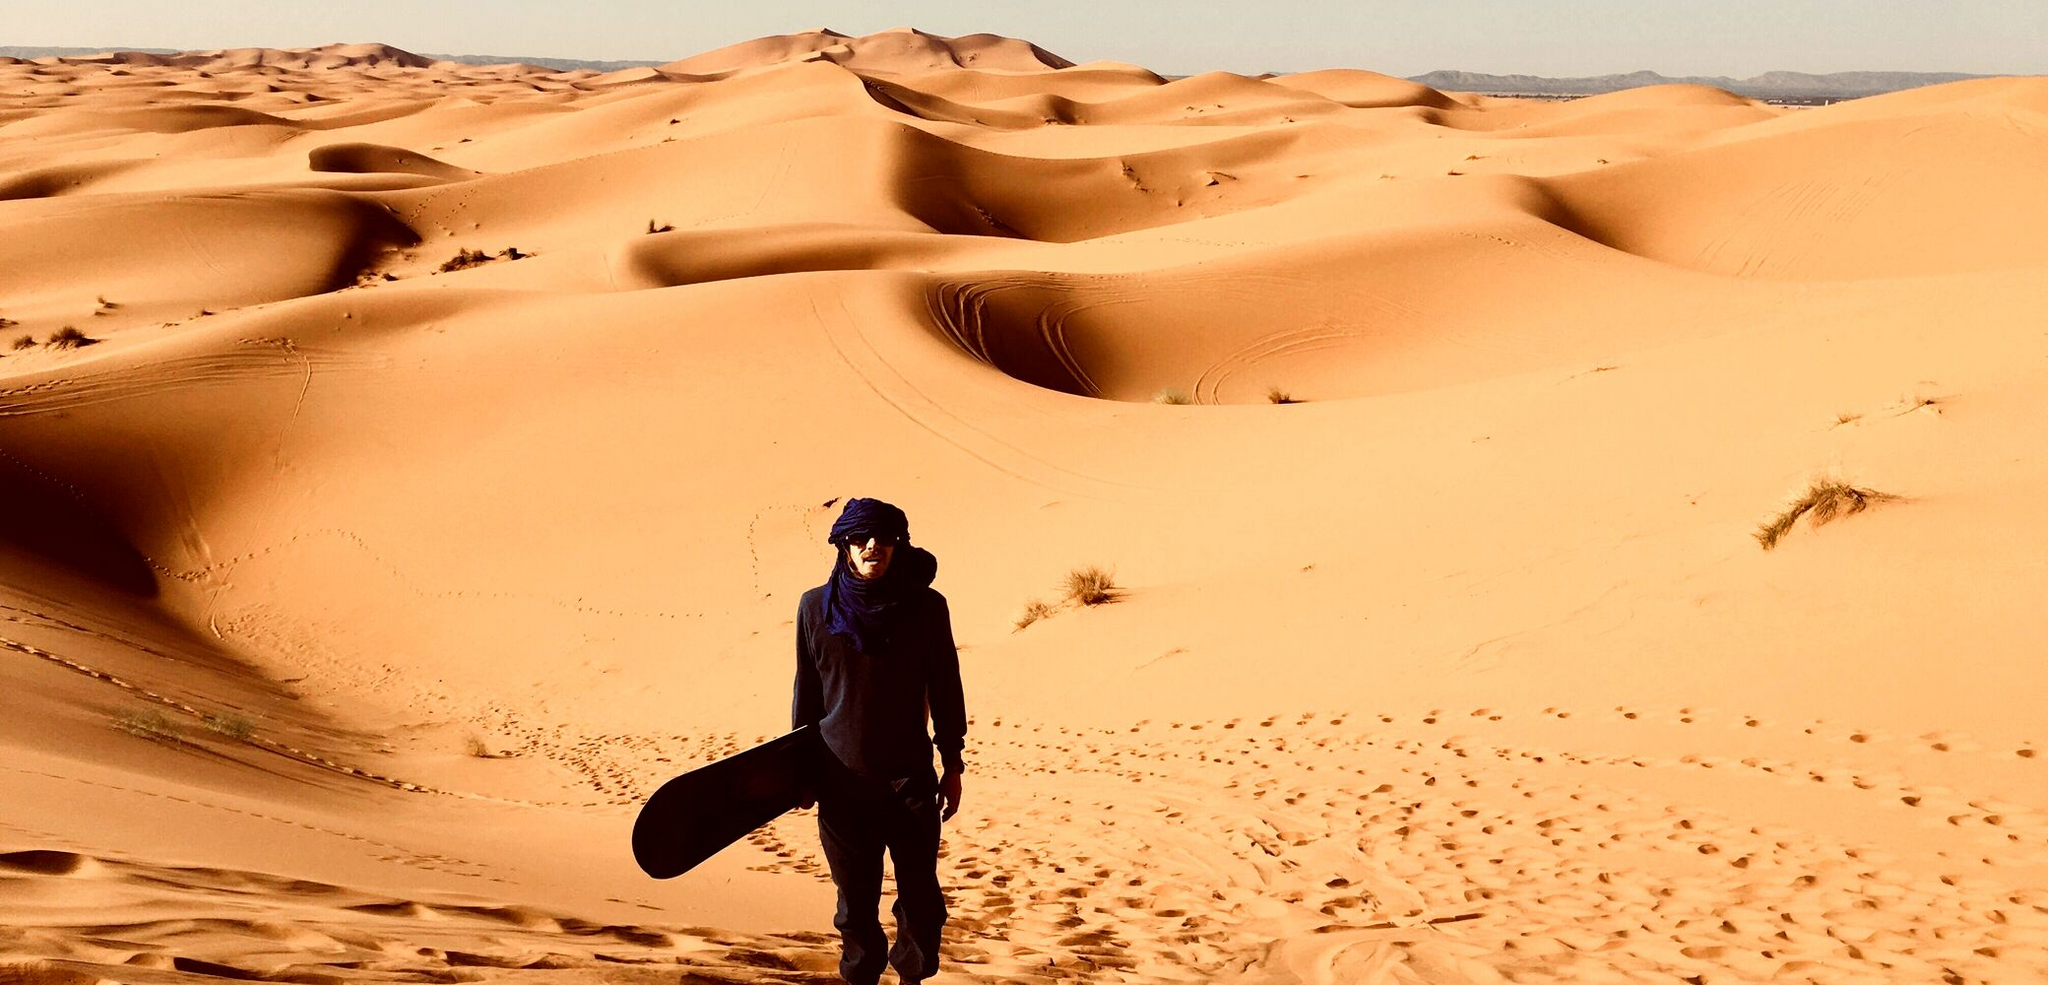 Lost Little One Travel Diaries. A guide to merzouga